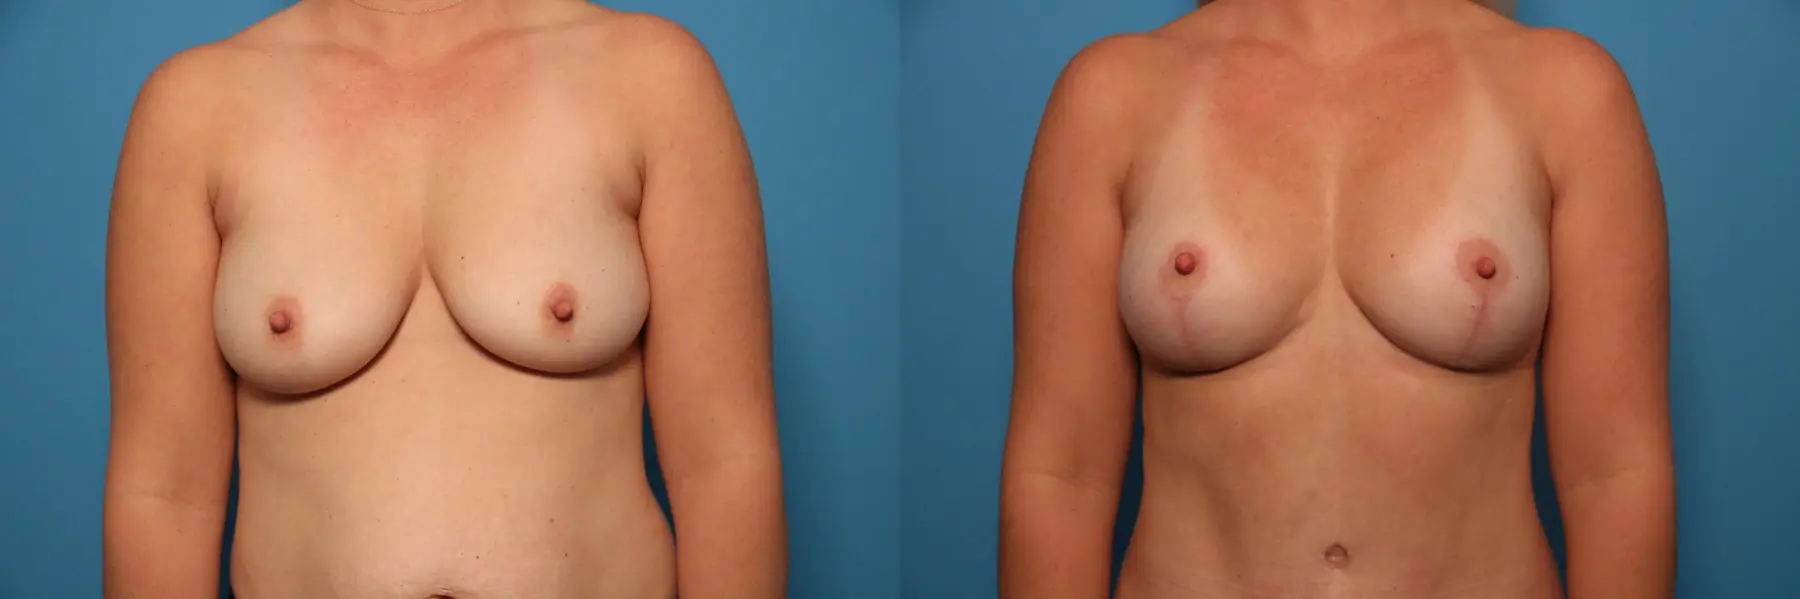 Fat Transfer - Breast: Patient 3 - Before and After  